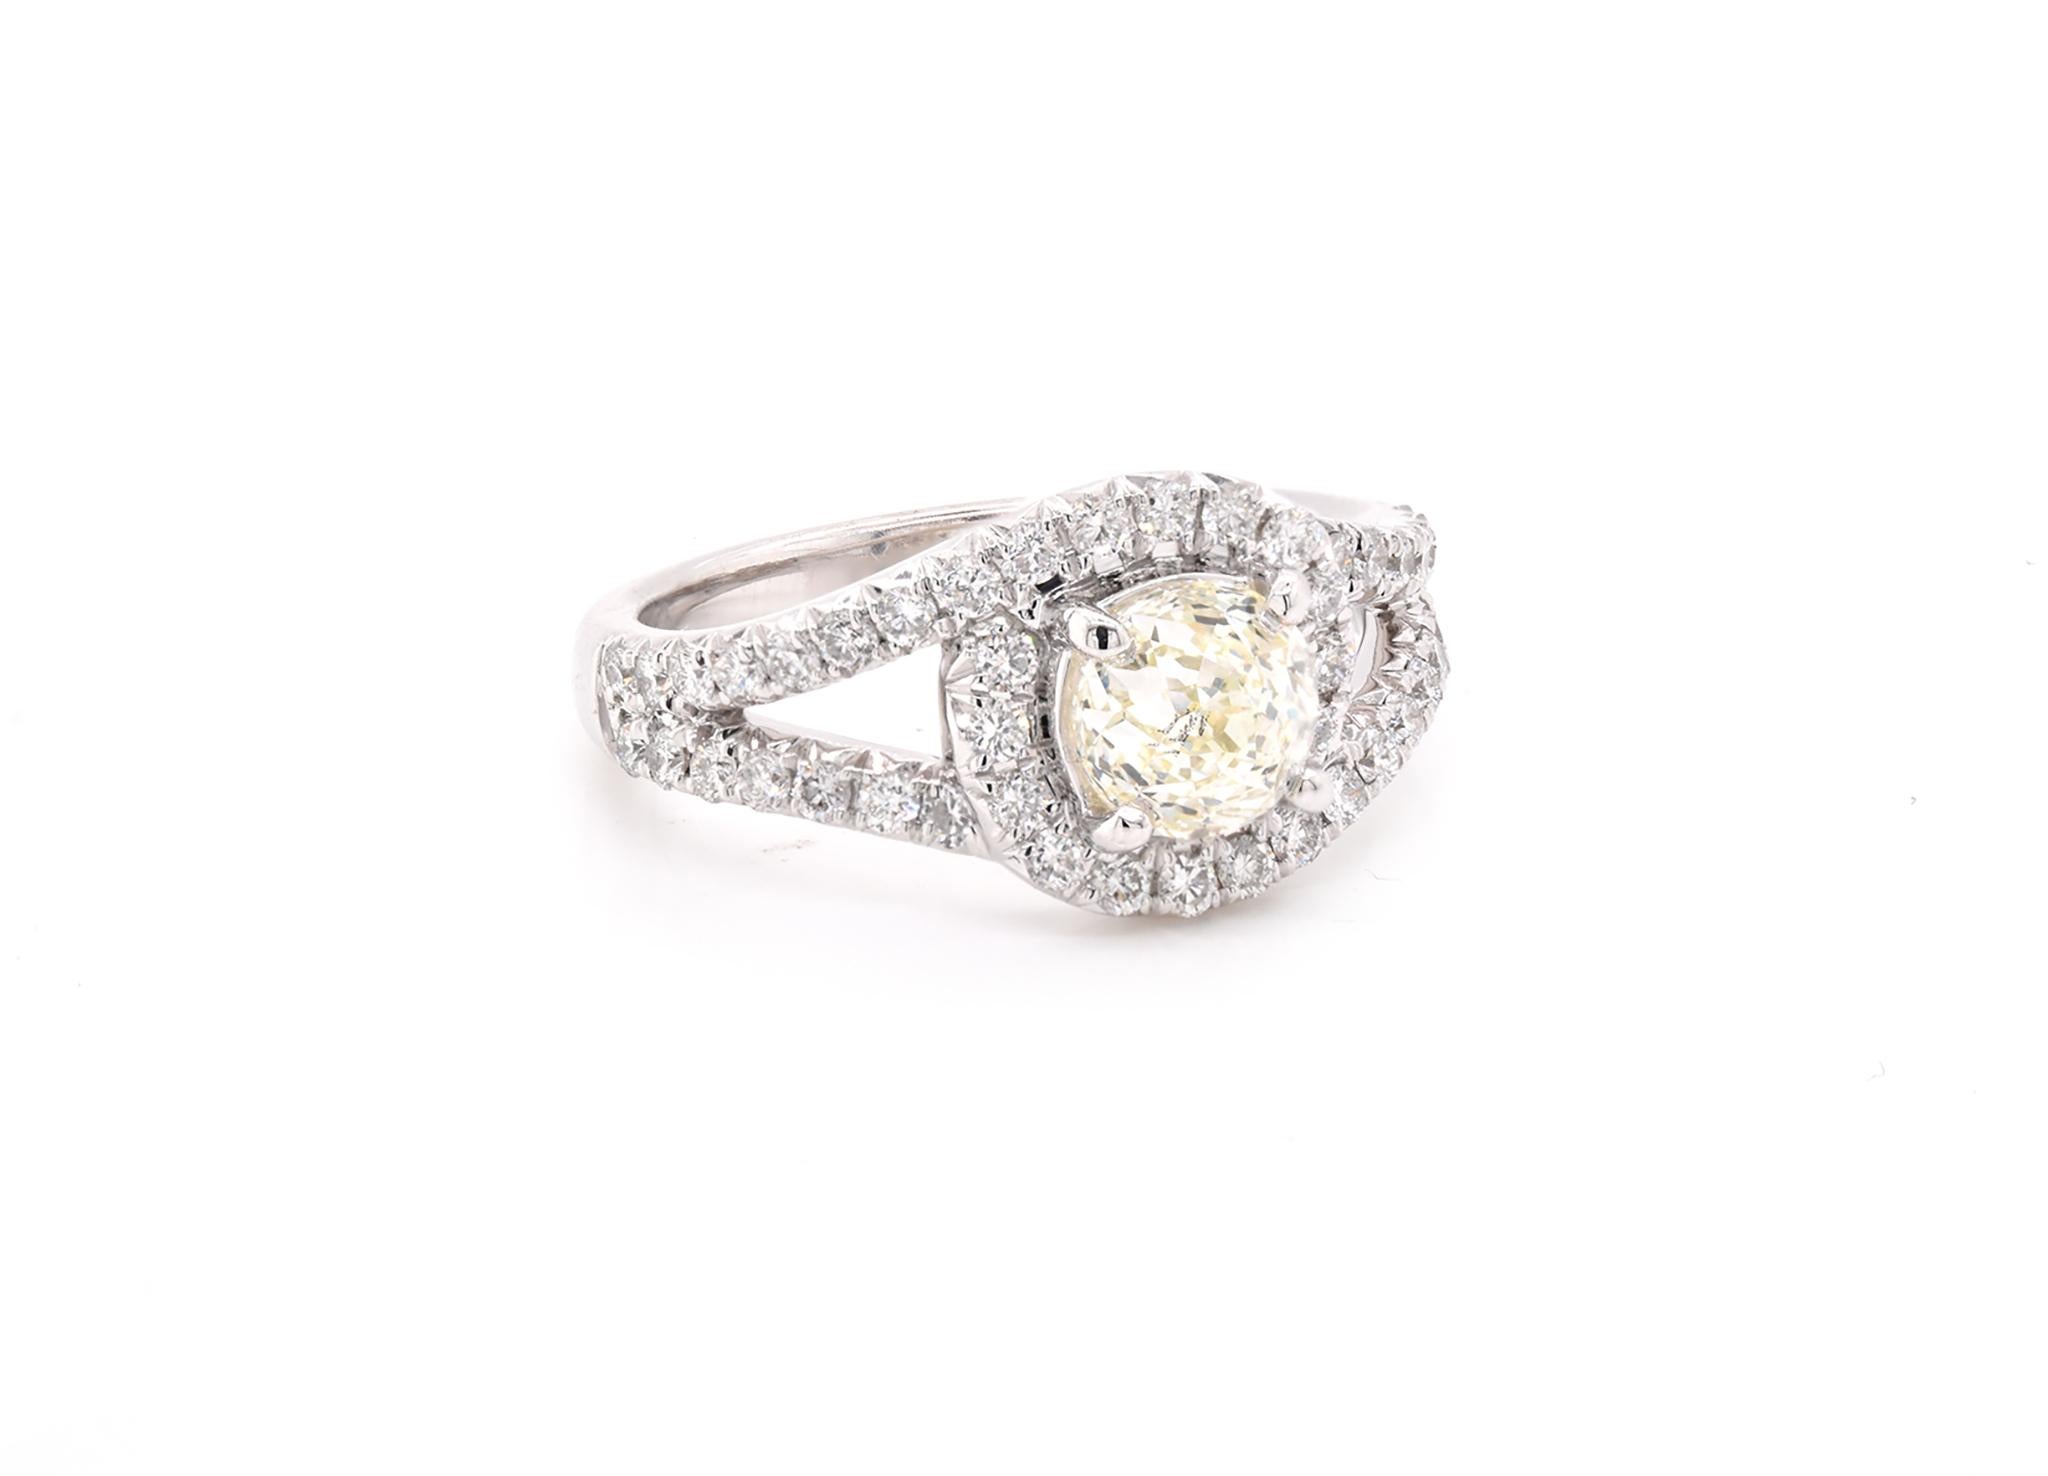 Material: 14K white gold
Center Diamond: 1 crown of light cut = 1.06ct
Color: K
Clarity: SI3
Diamond: 46 round cut = .61cttw
Color: G
Clarity: VS
Ring Size: 6.5 (please allow up to 2 additional business days for sizing requests)
Dimensions: ring